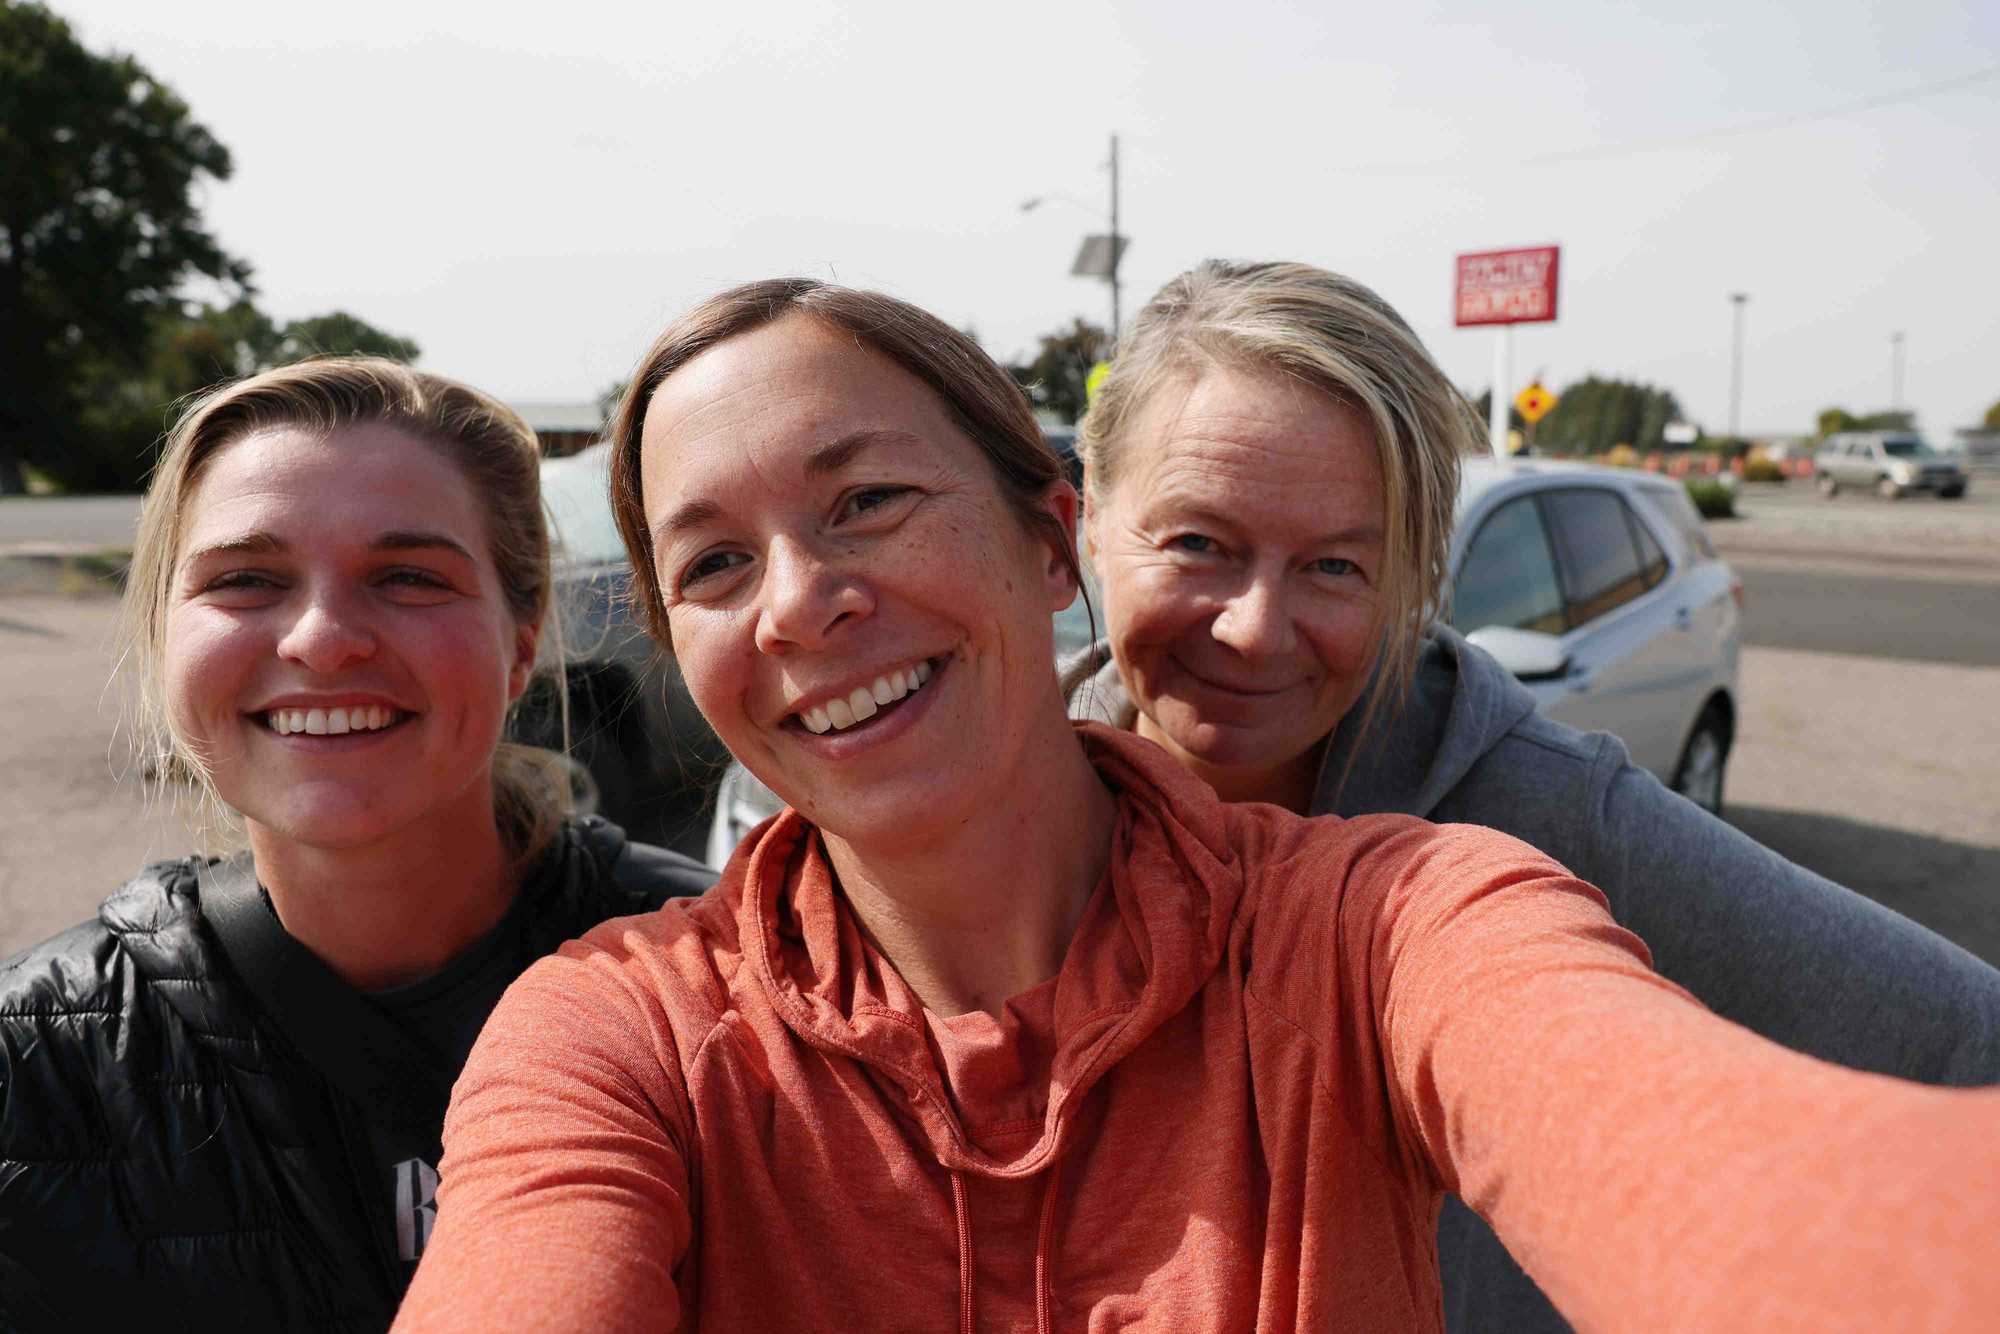 From left to right: Globe staffers Hanna Krueger, Jessica Rinaldi, and Jenna Russell on the road in Idaho. 